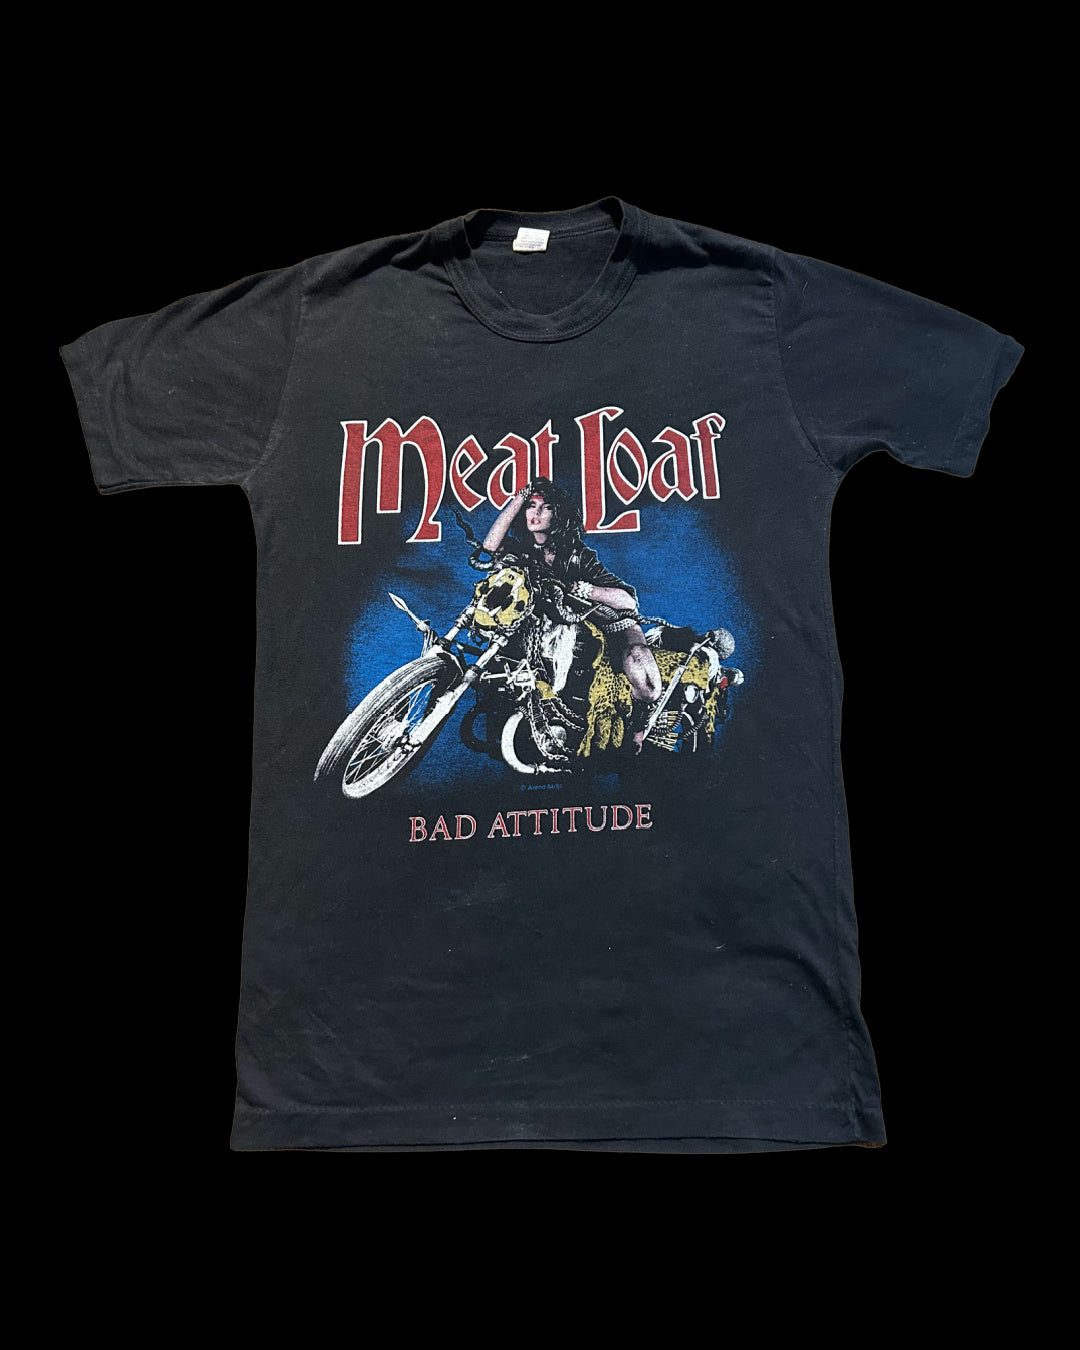 Meat Loaf 1984/85 Bad Attitude UK tour tee